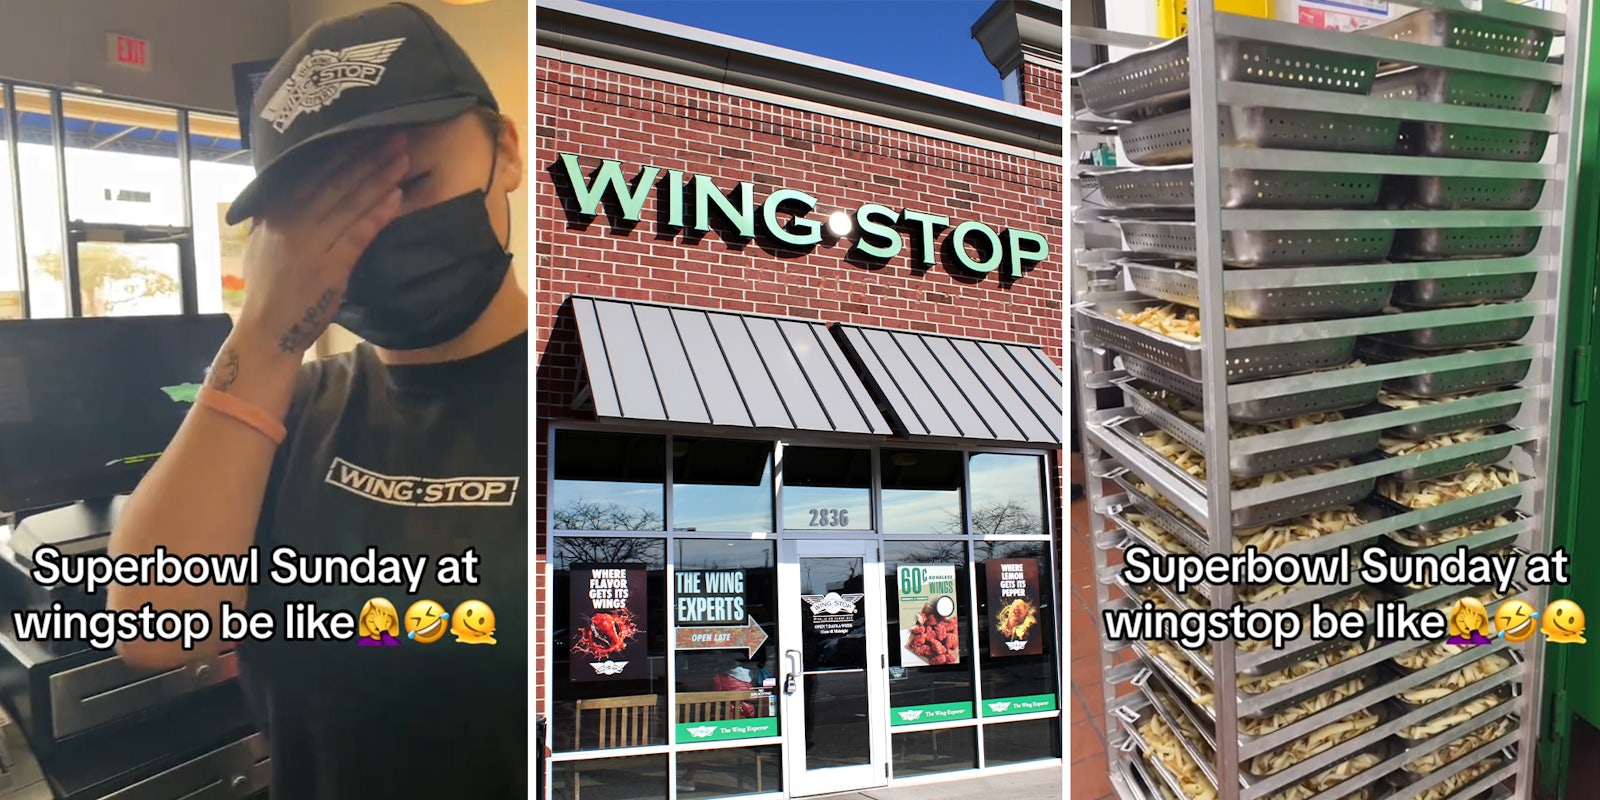 Wingstop workers show what's it like to work on Super Bowl Sunday